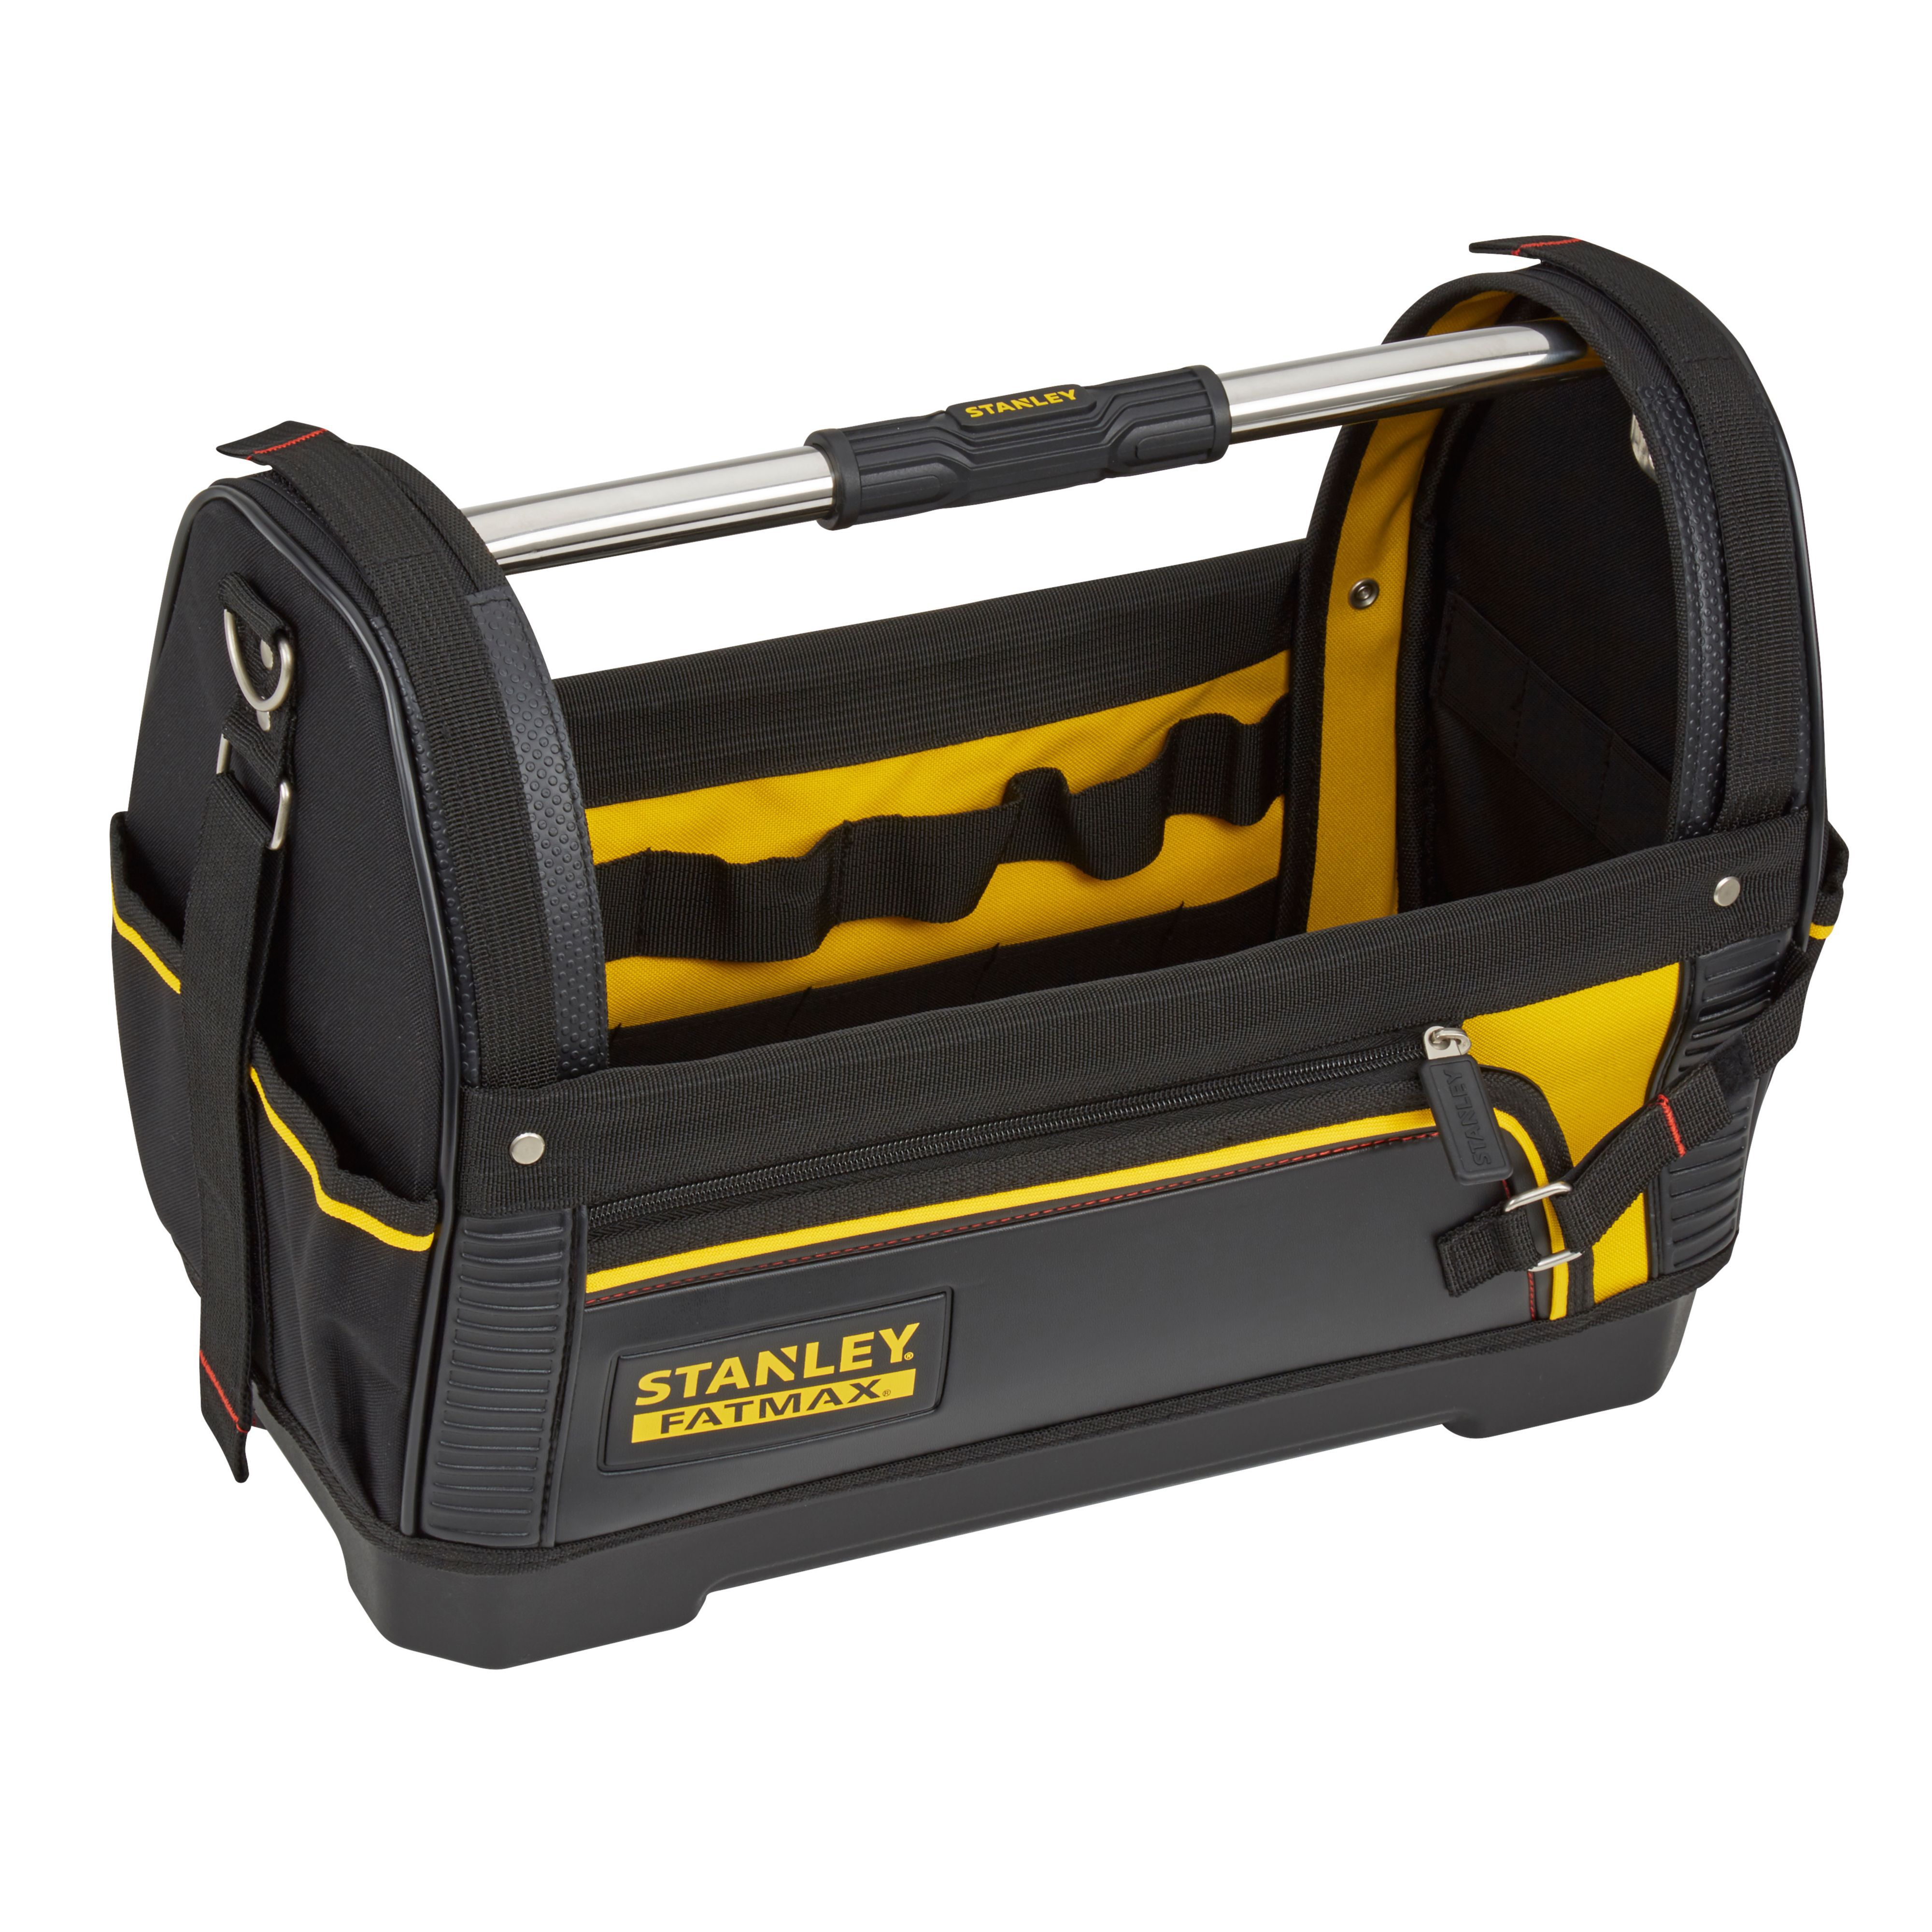 Stanley Open tote